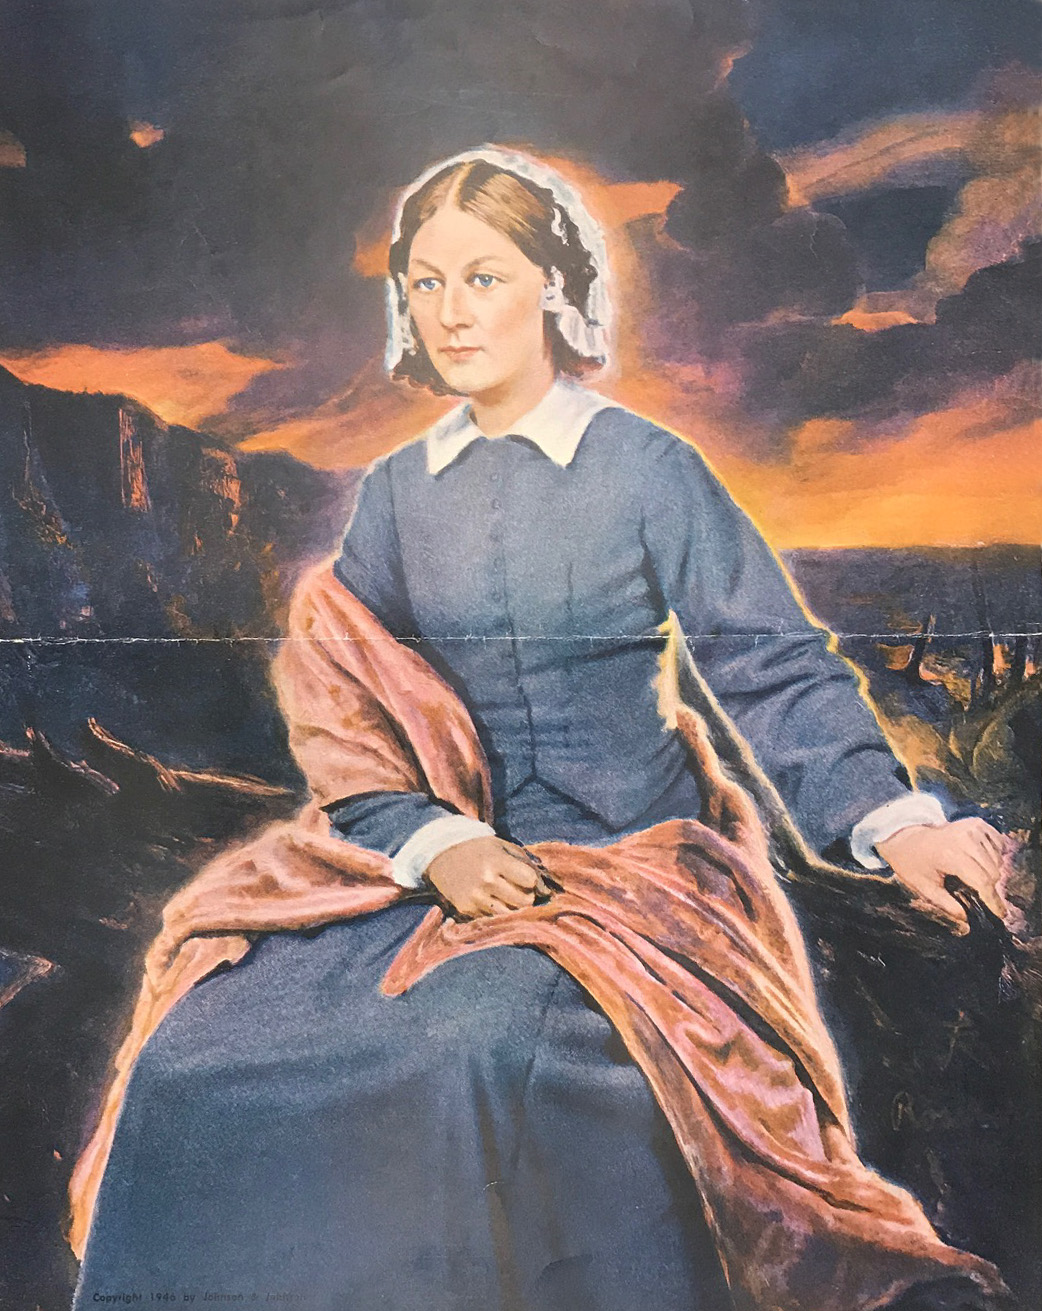 Painting of Florence Nightingale commissioned by Johnson & Johnson in 1946 to honor the profession of nursing.